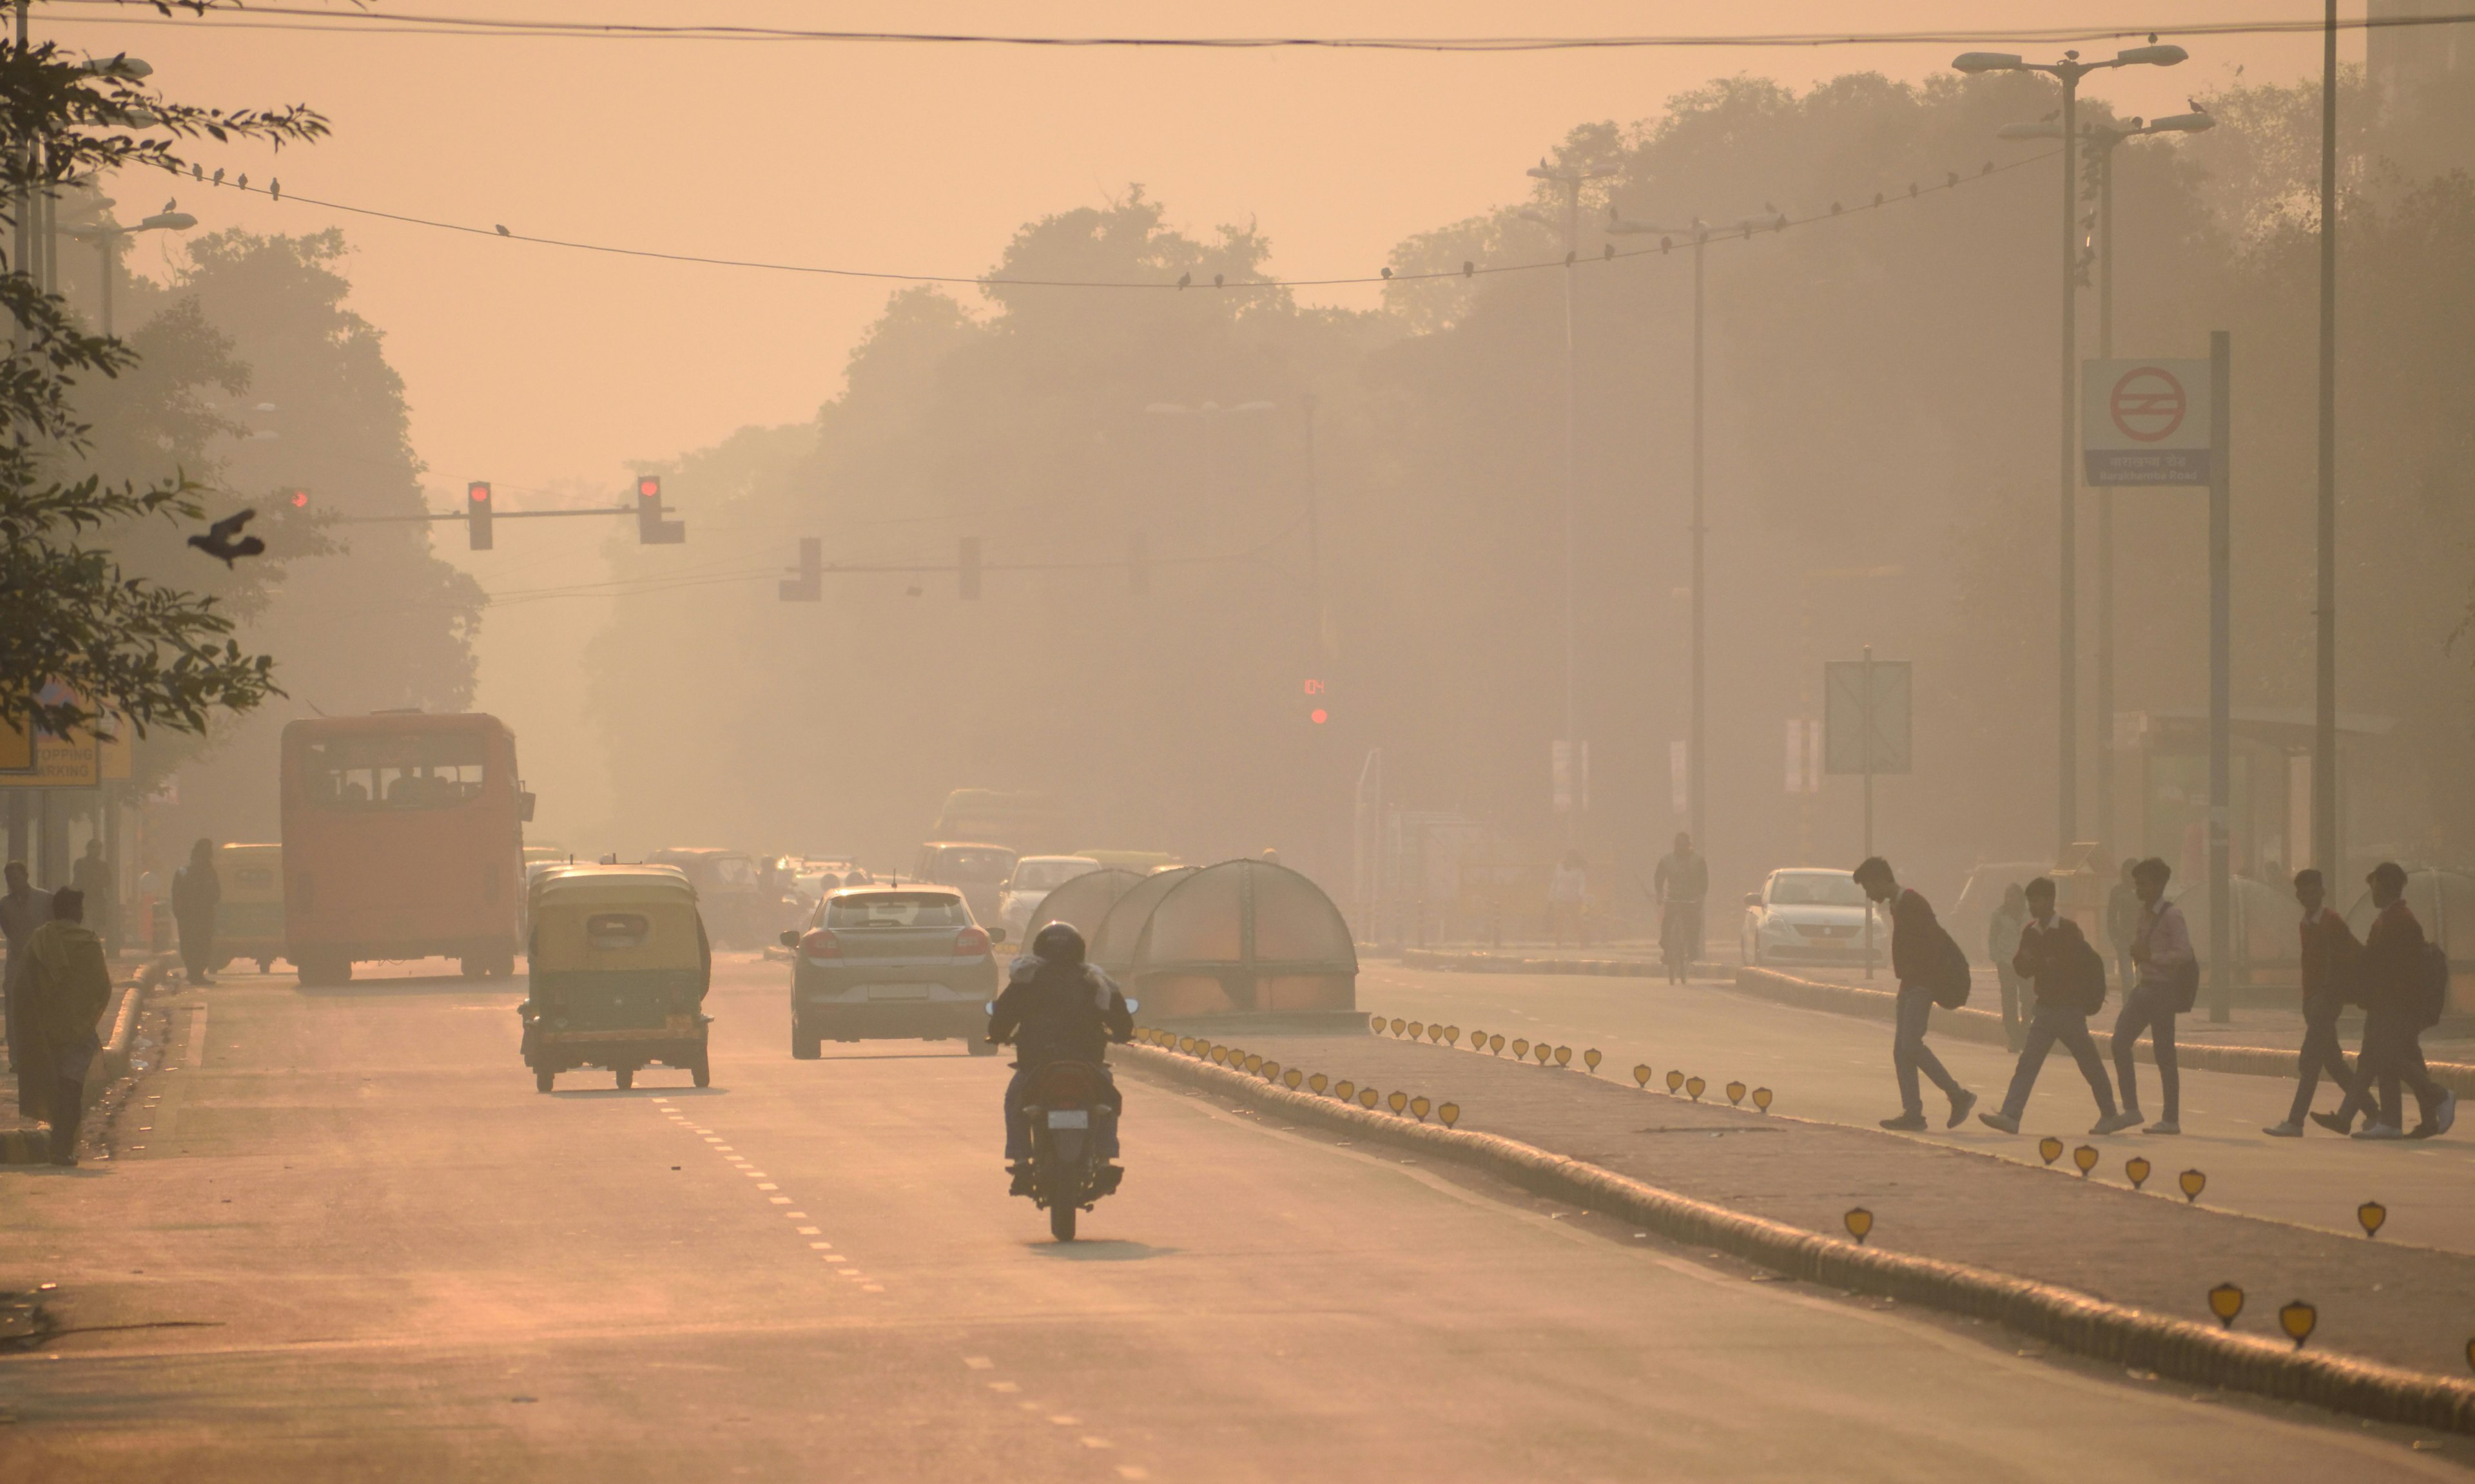 Delhi’s First Mobile Air Monitoring Station Collects Valuable Air Pollution Data